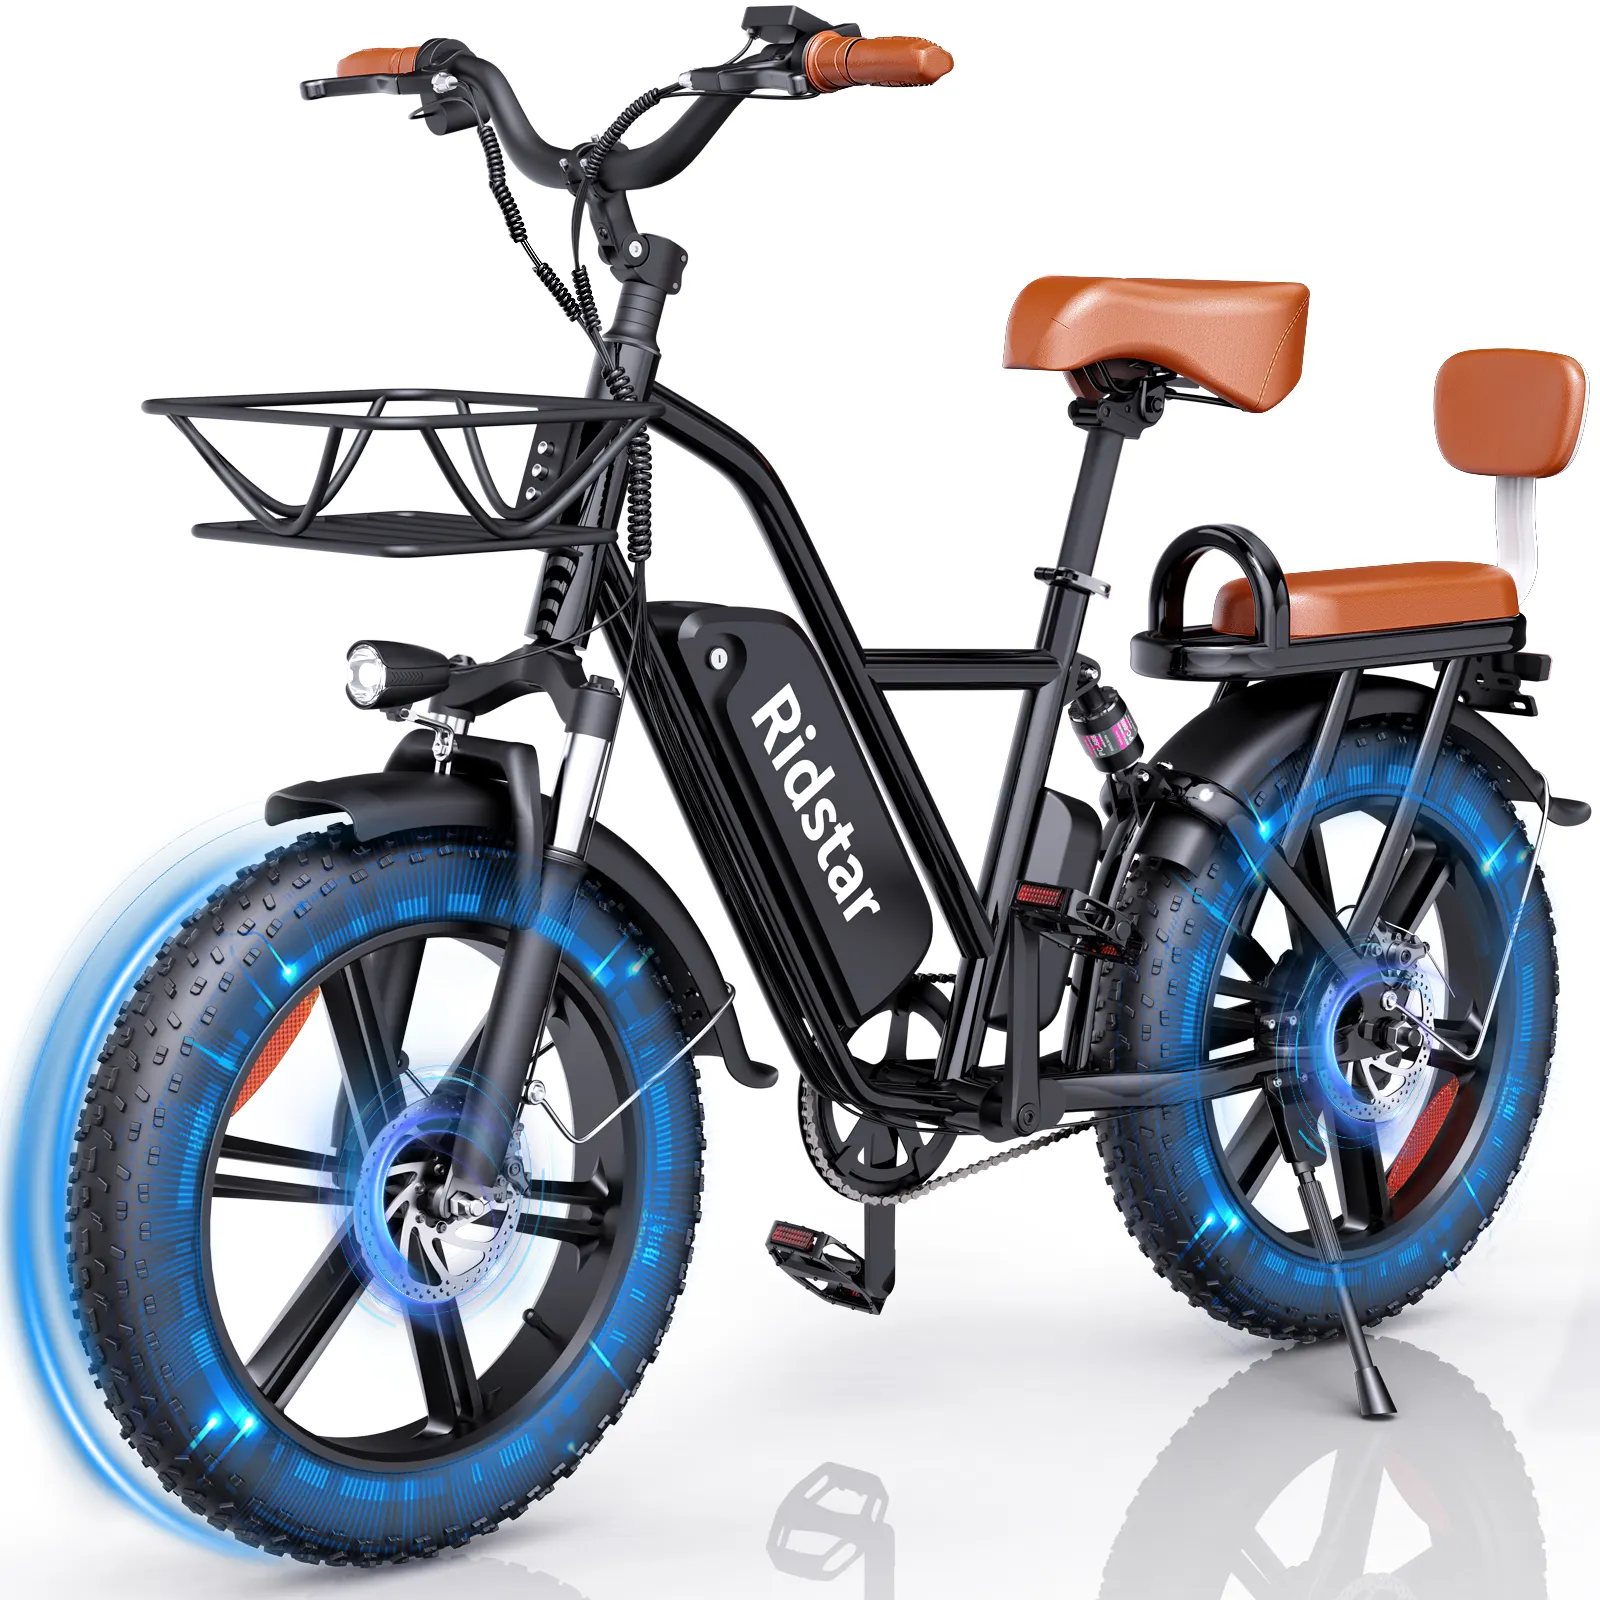 Free Shipping Thick Tyre Eletrica Bicicleta 20 Inch Wheels 500W 15Ah Electric Bicycle With Kids Seat